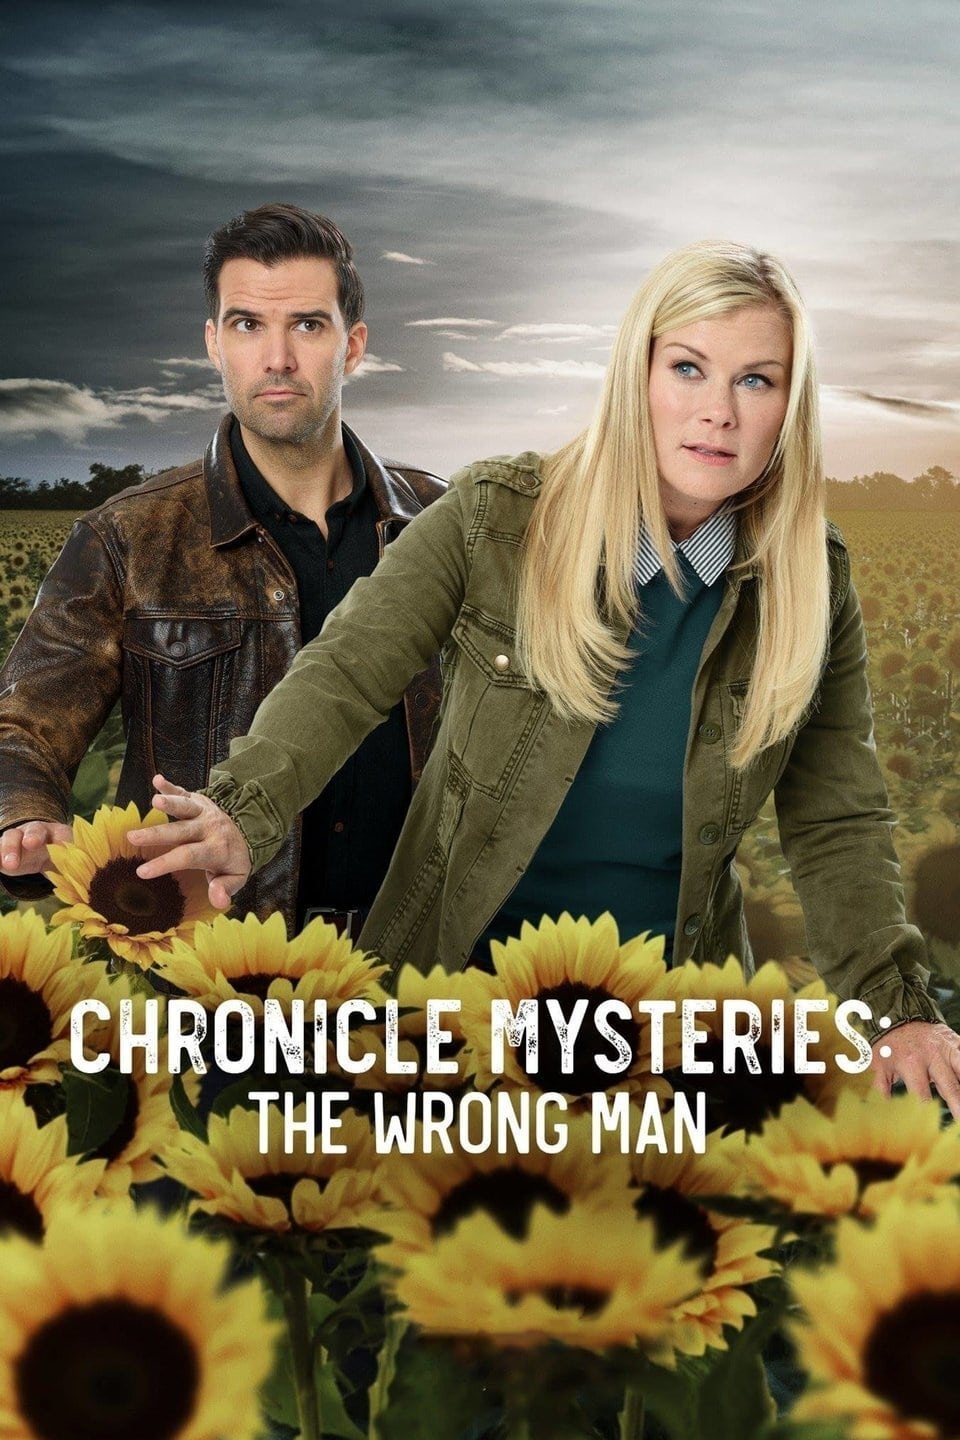 Chronicle Mysteries: The Wrong Man (2019)